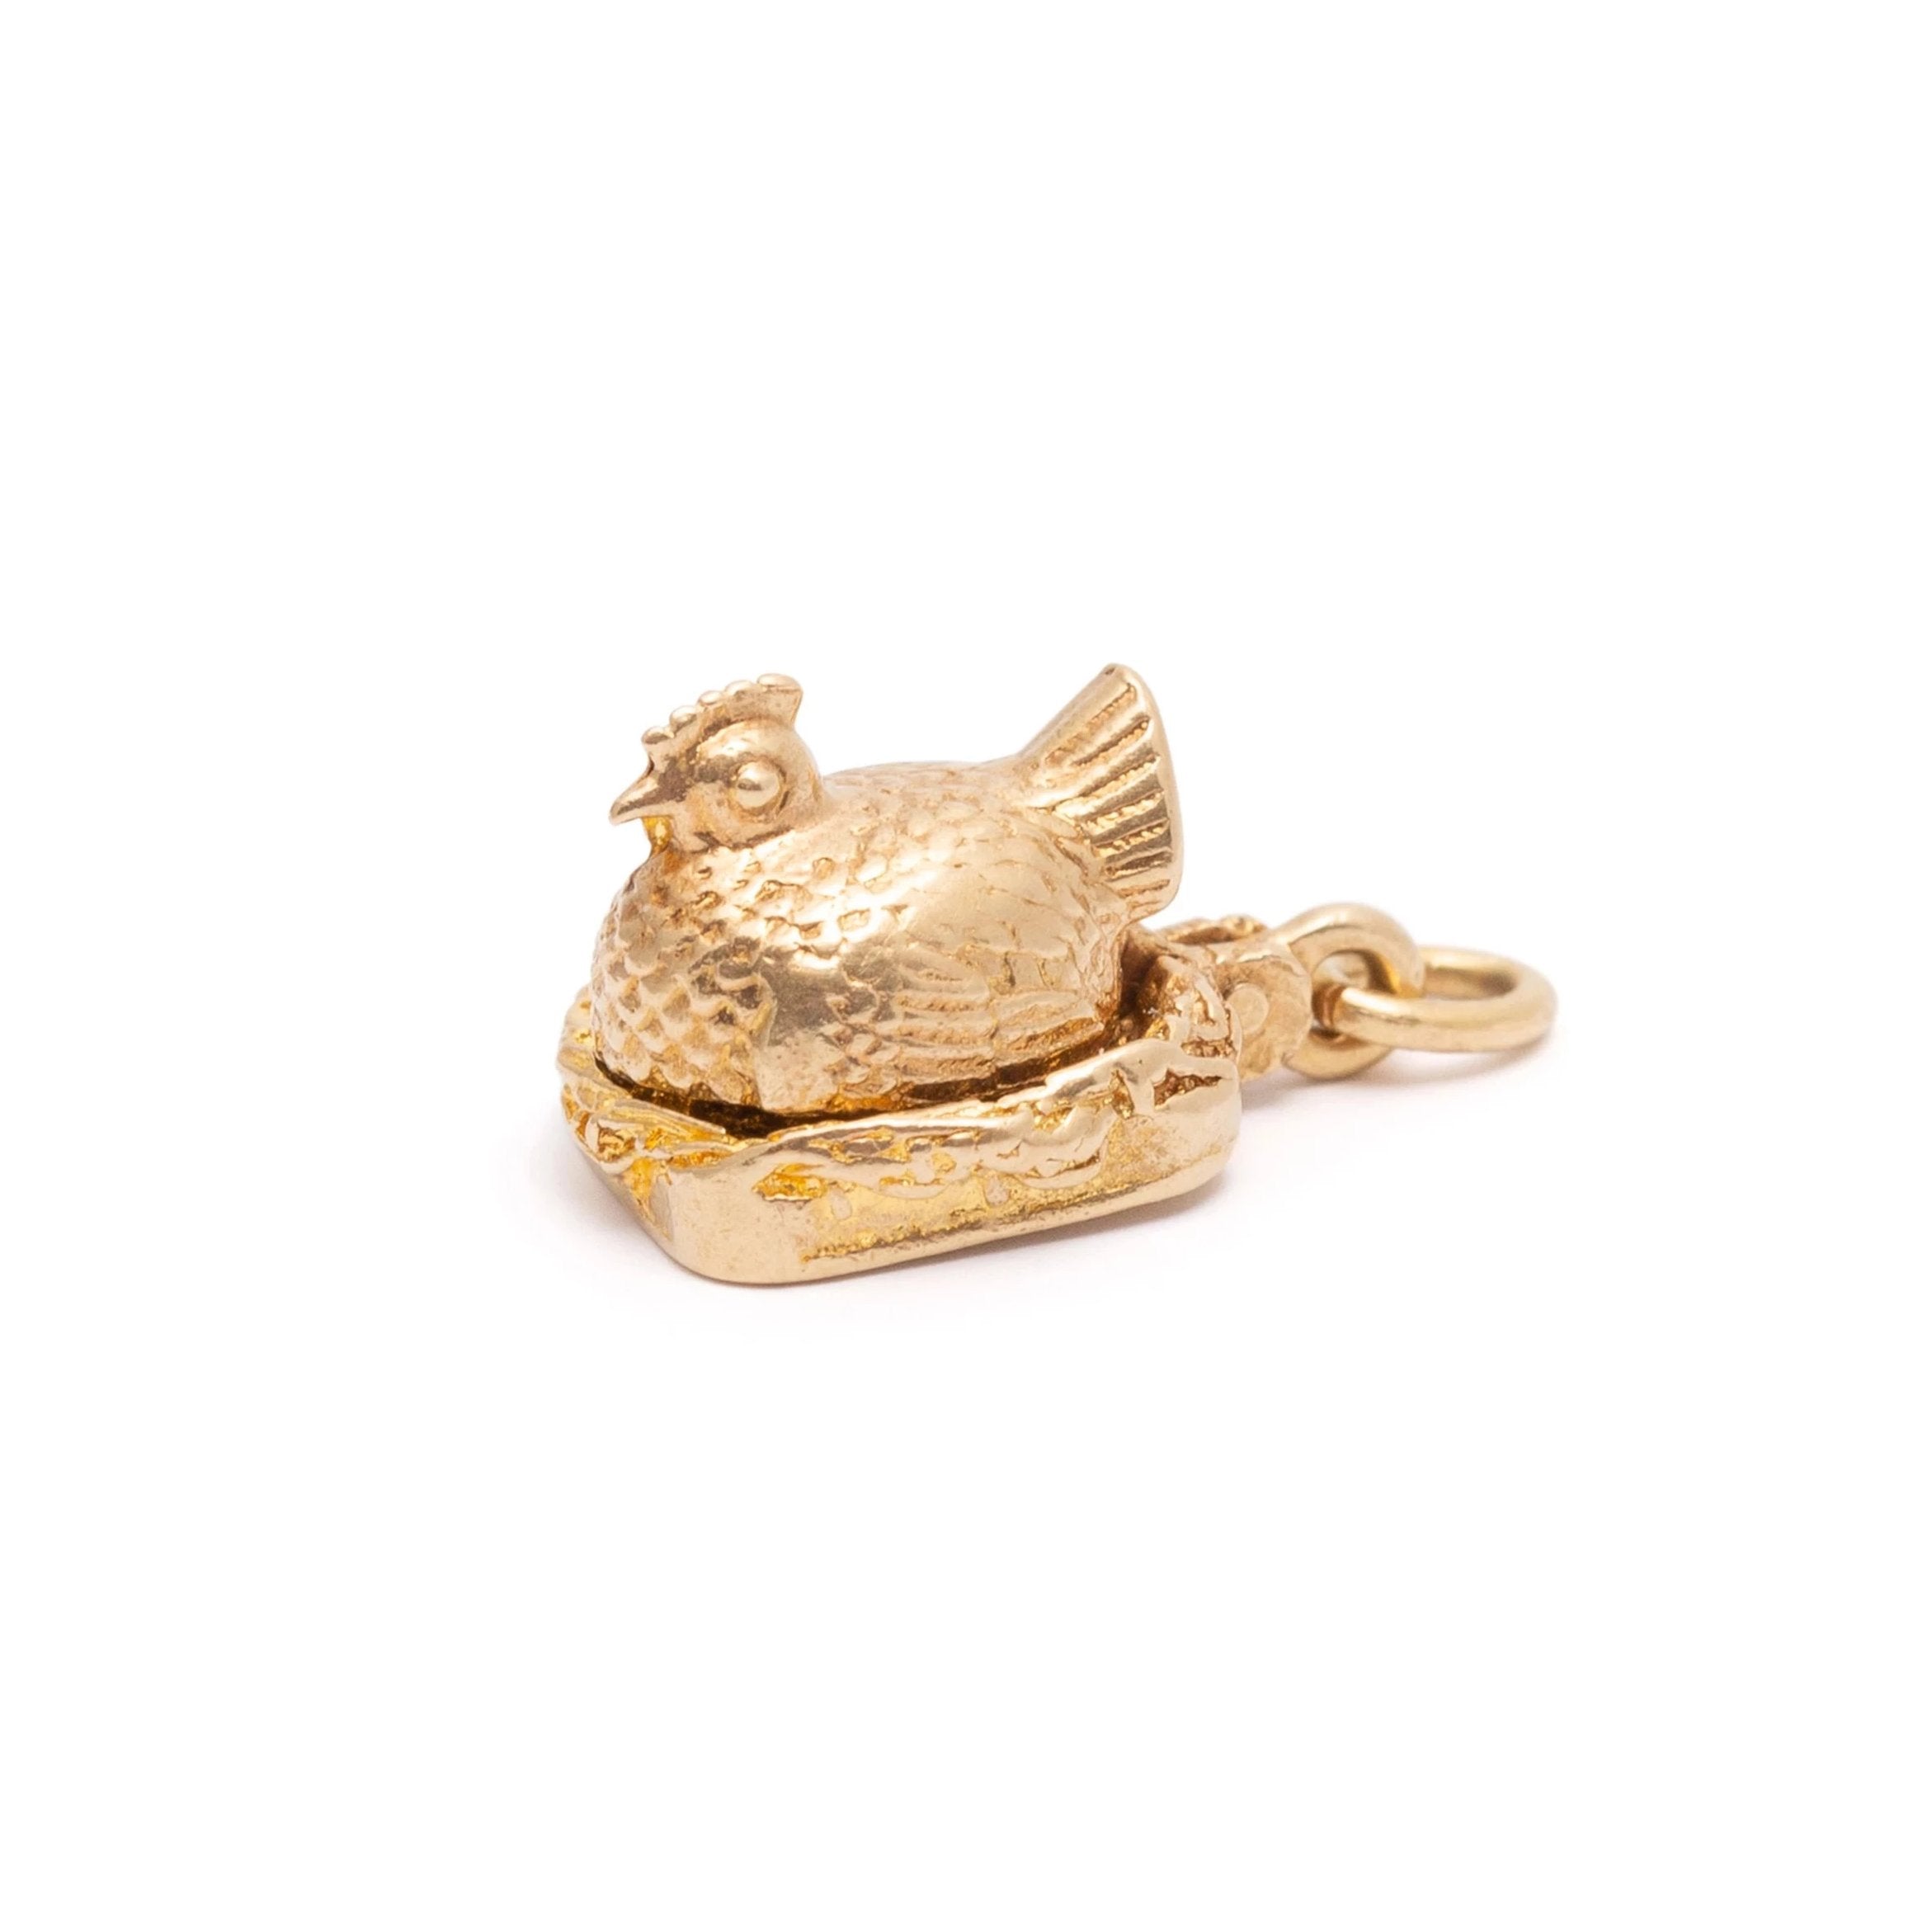 Movable "Freshly Laid" Chicken with Pearls and 14K Gold Charm